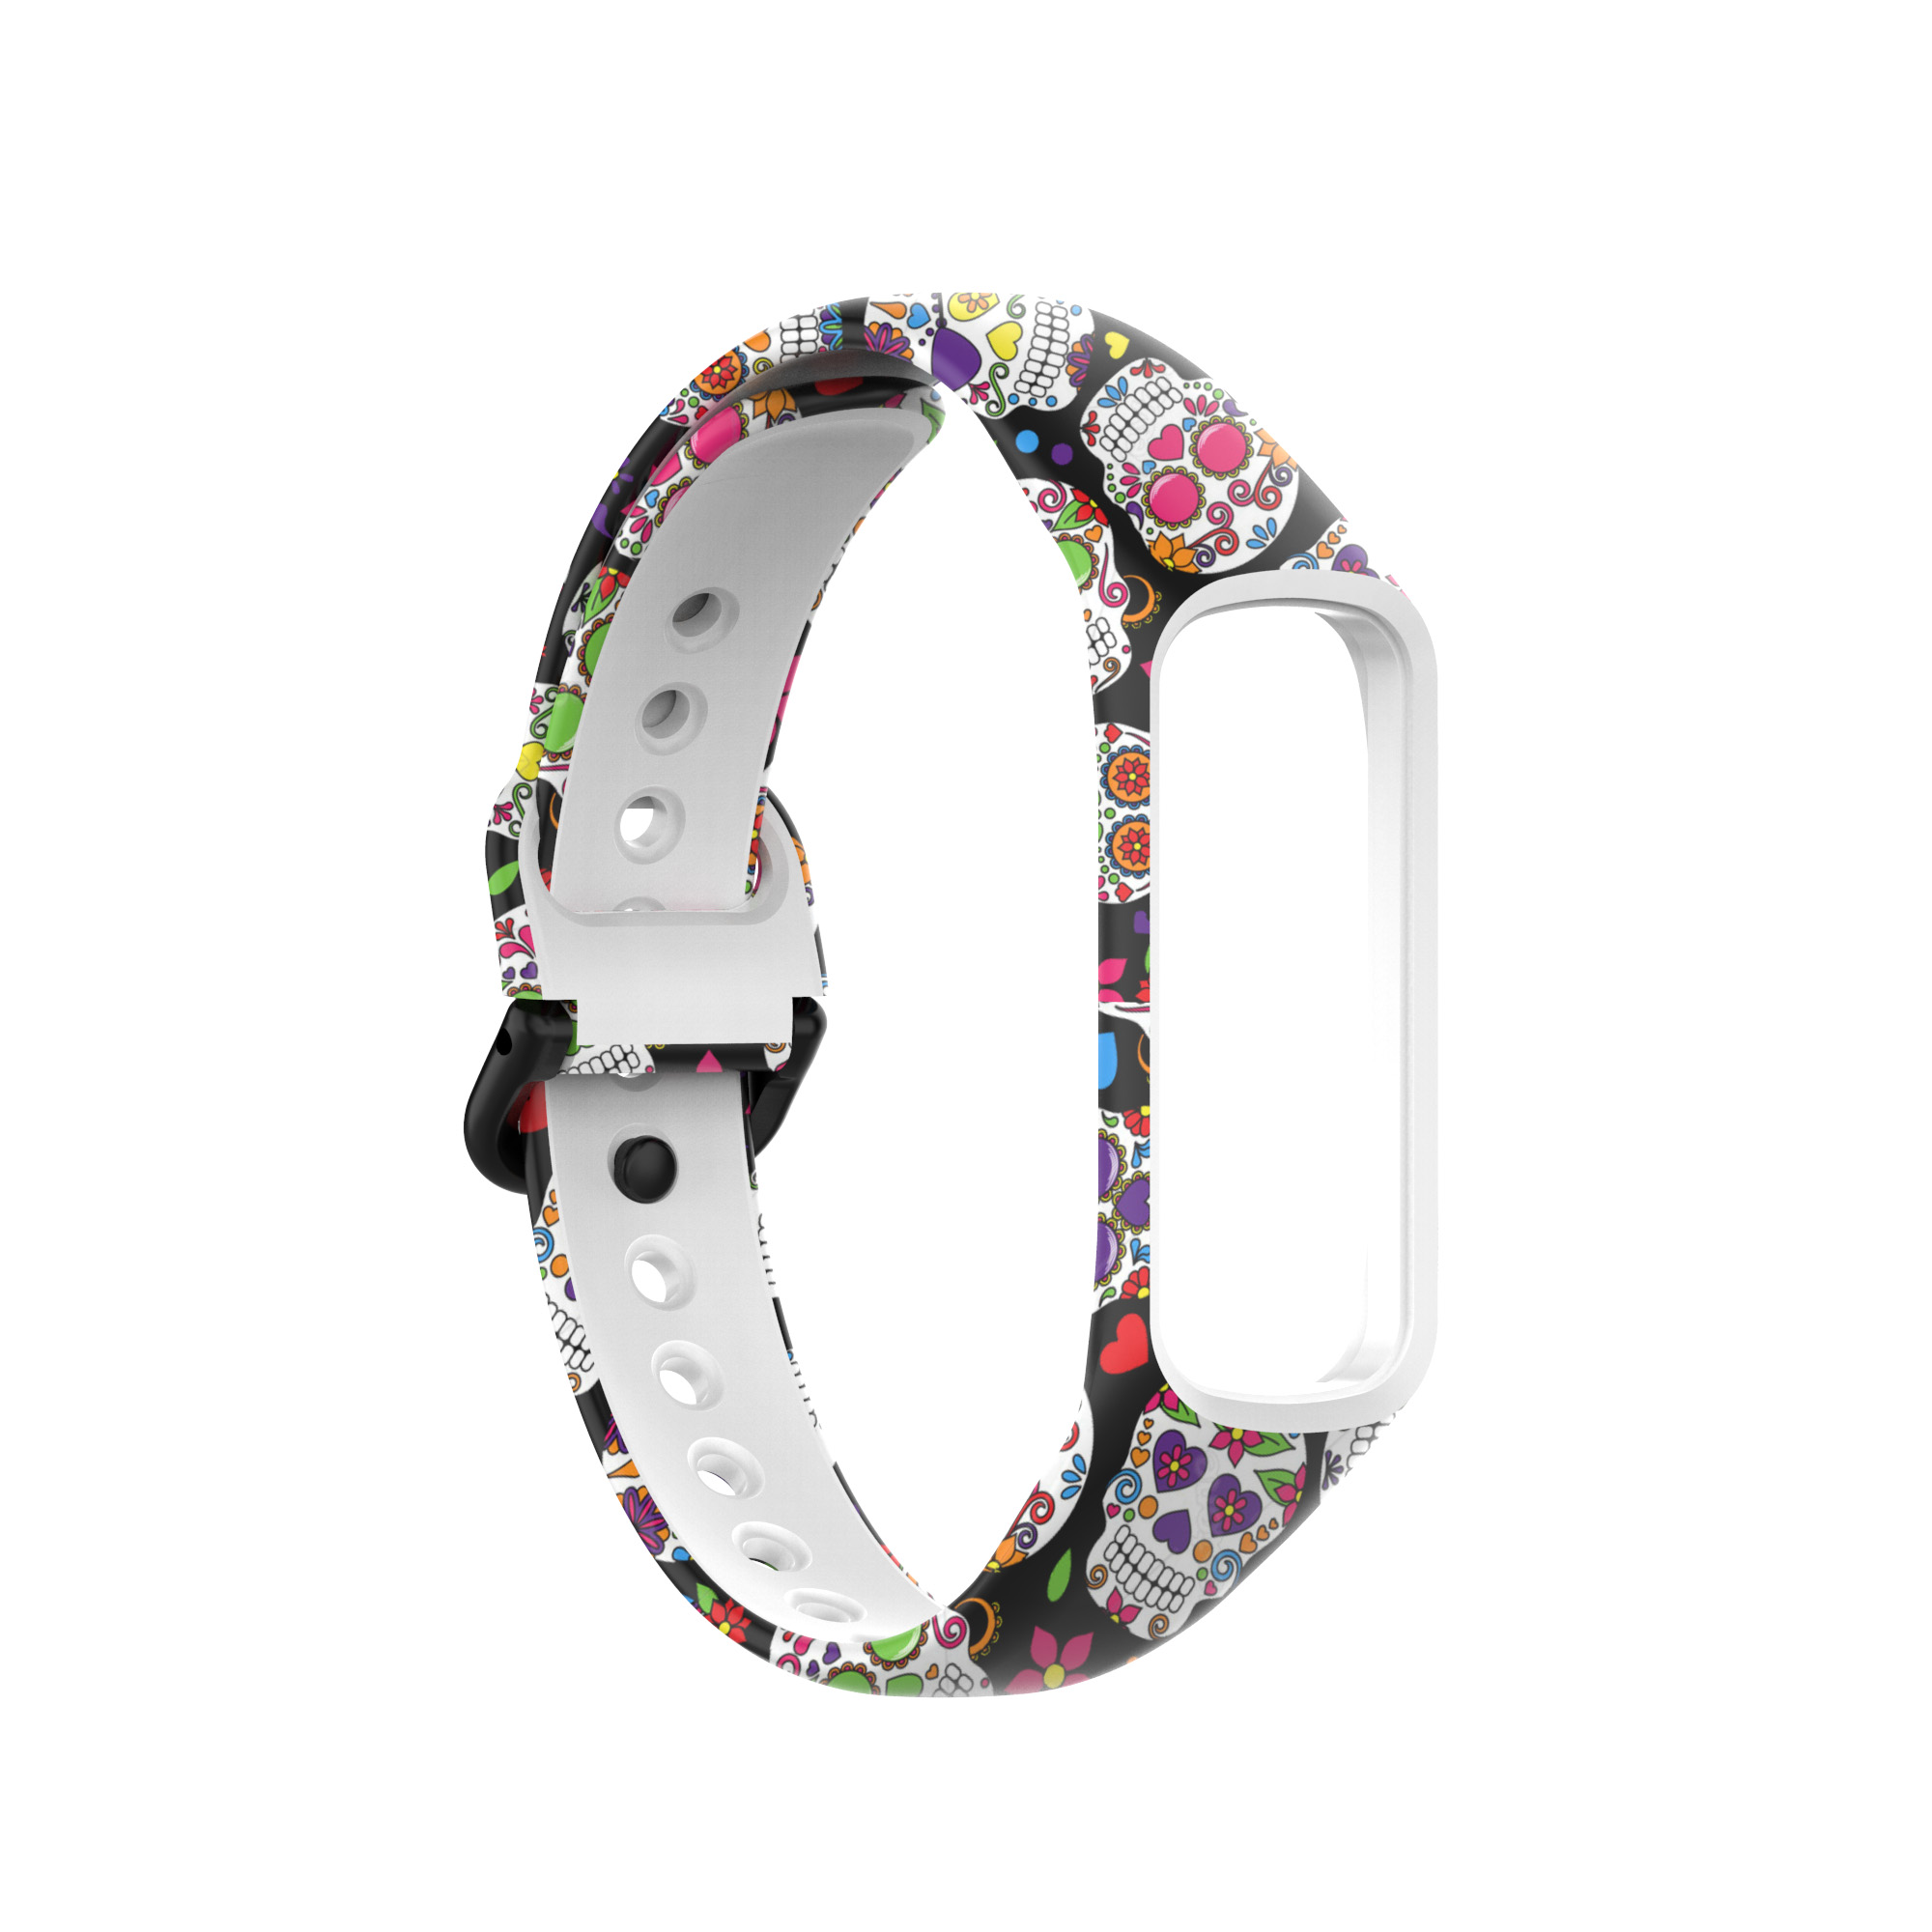 Bakeey-Printed-Pattern-Stainless-Steel-Buckle-Smart-watch-Band-Replacement-Strap-For-Samsung-Galaxy--1806217-28